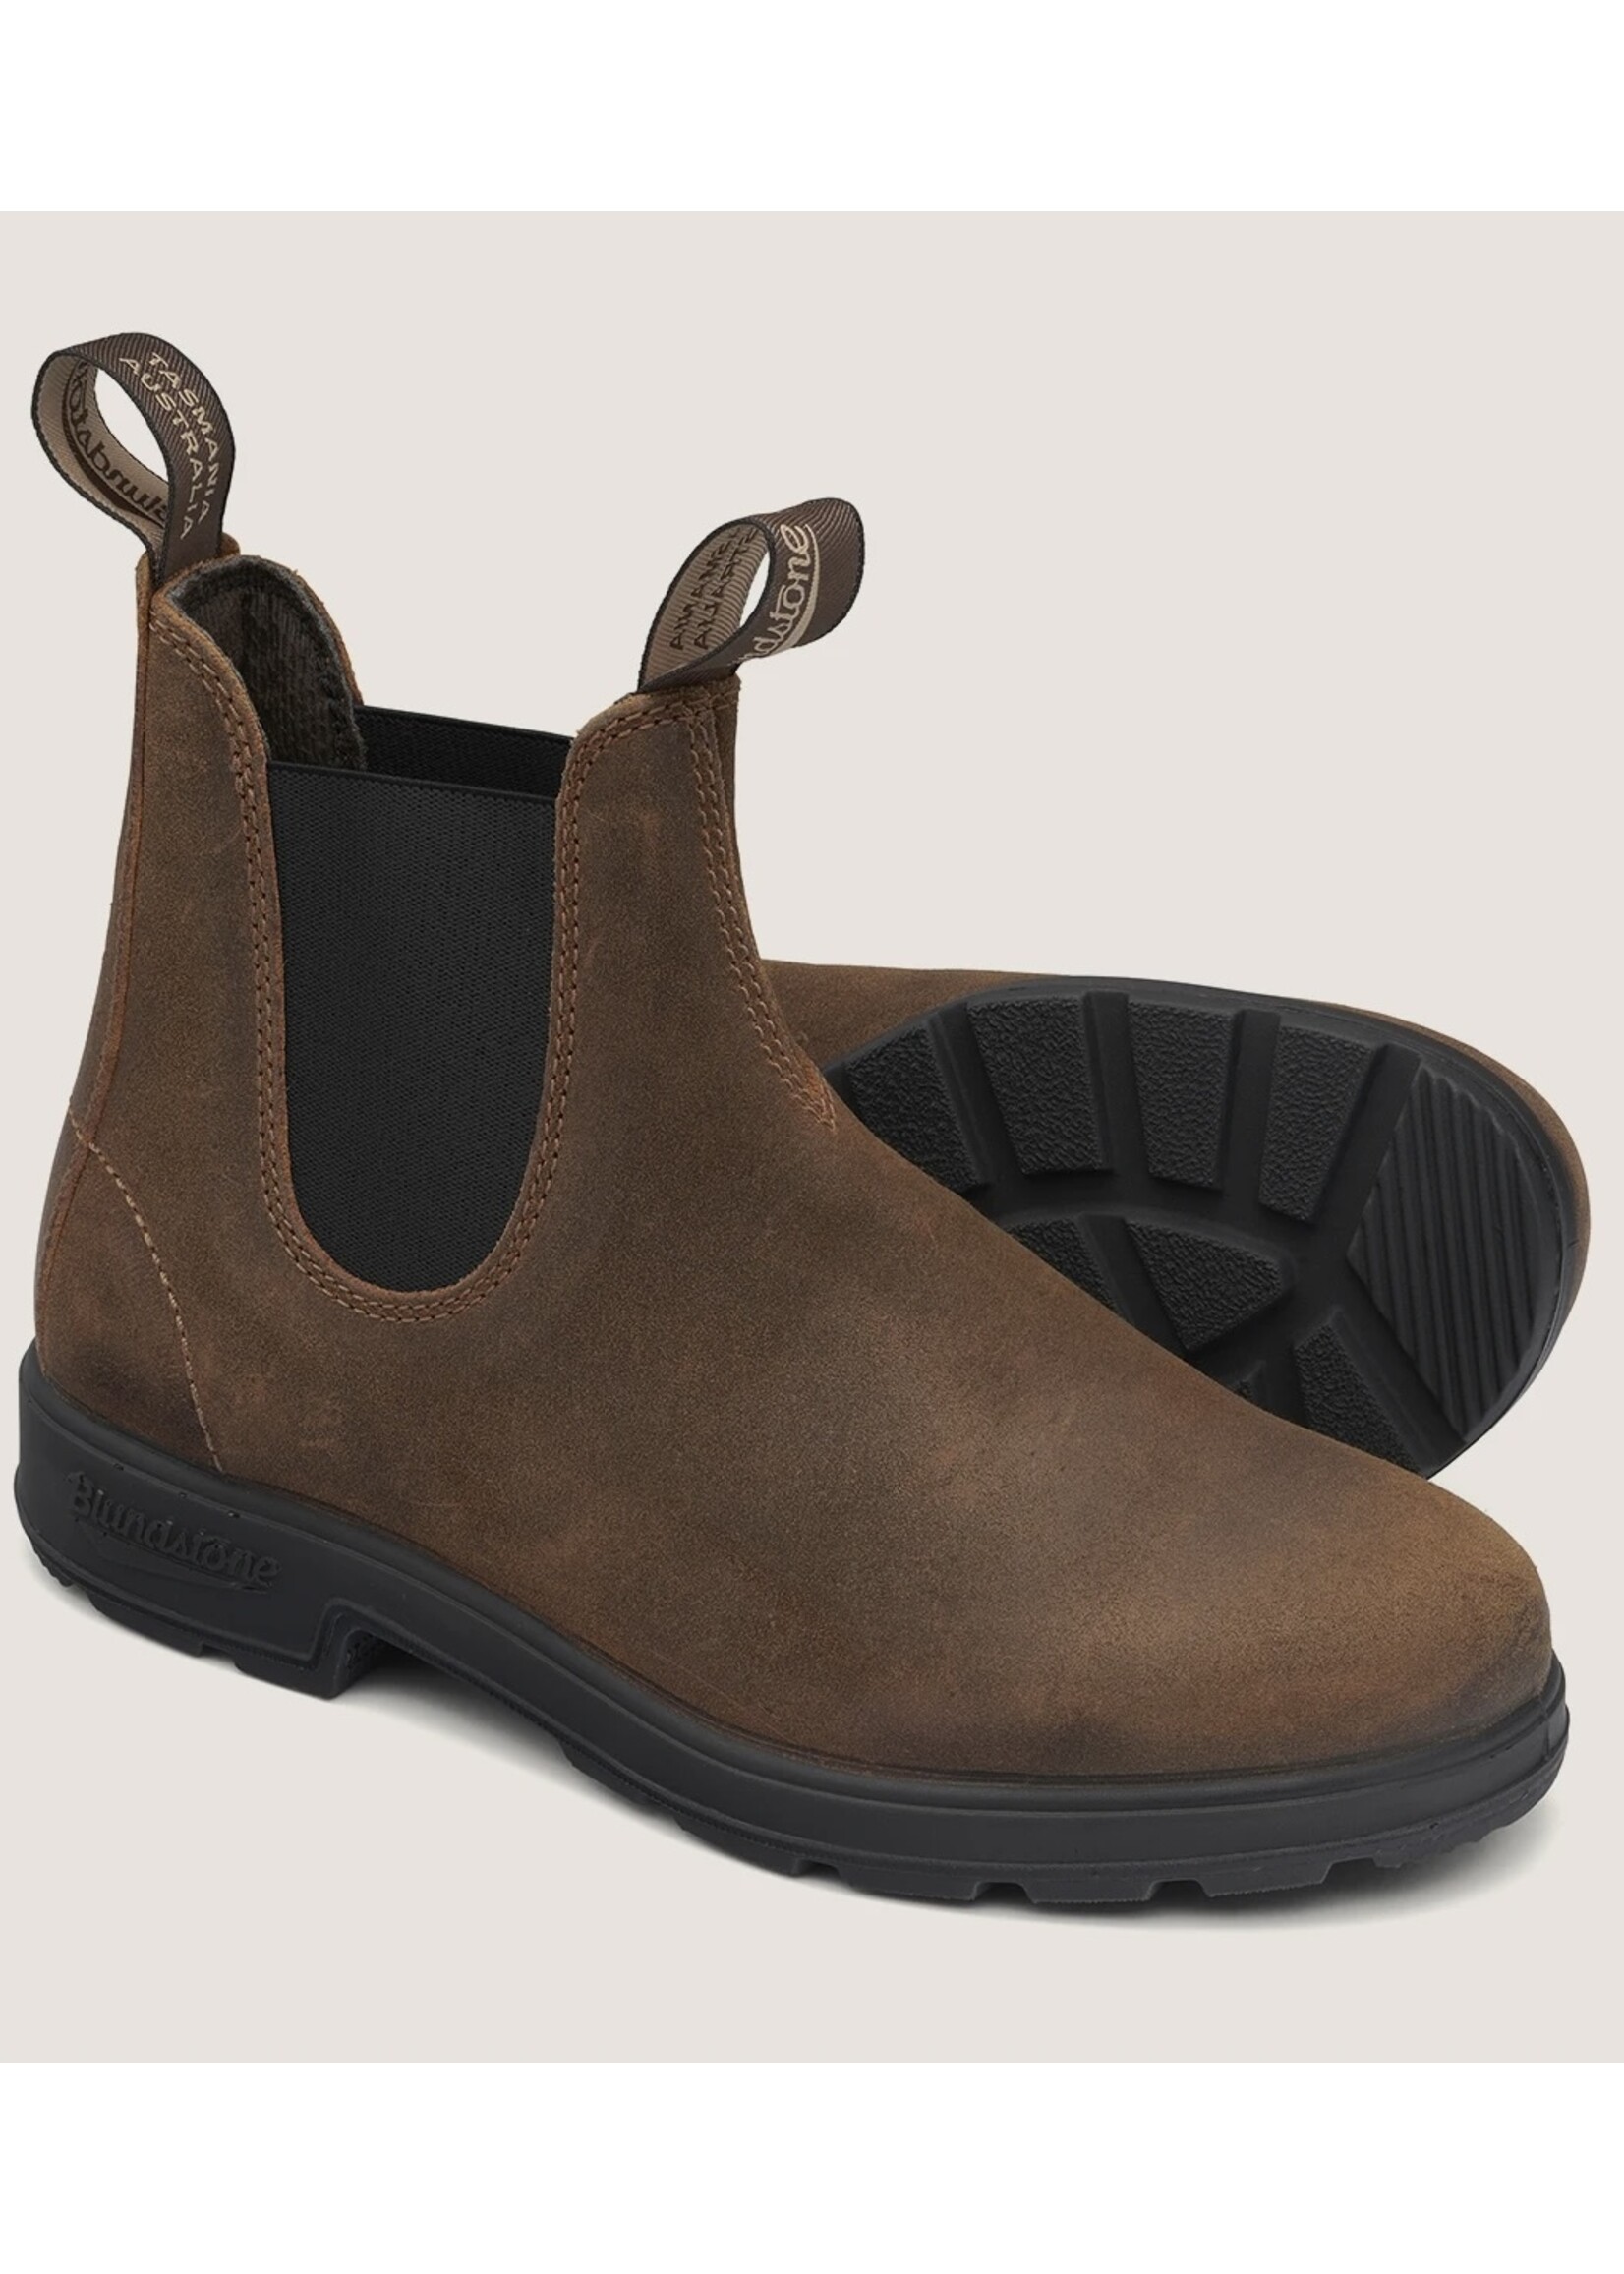 Blundstone 1911 Elastic Sided Suede Boot Tobacco